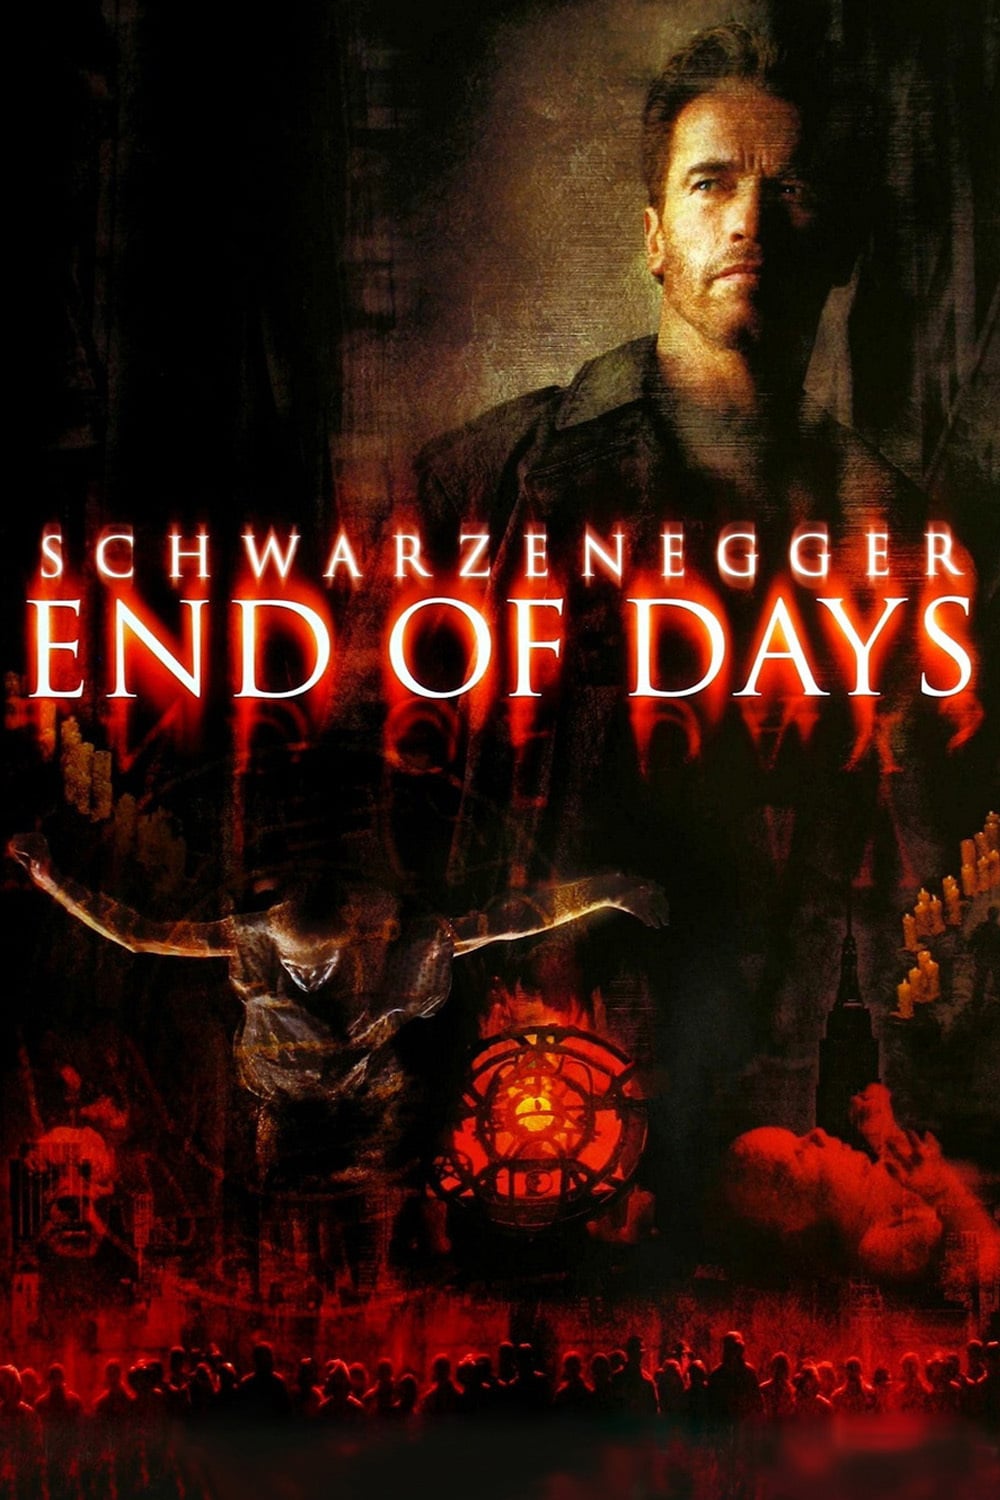 Poster for the movie "End of Days"